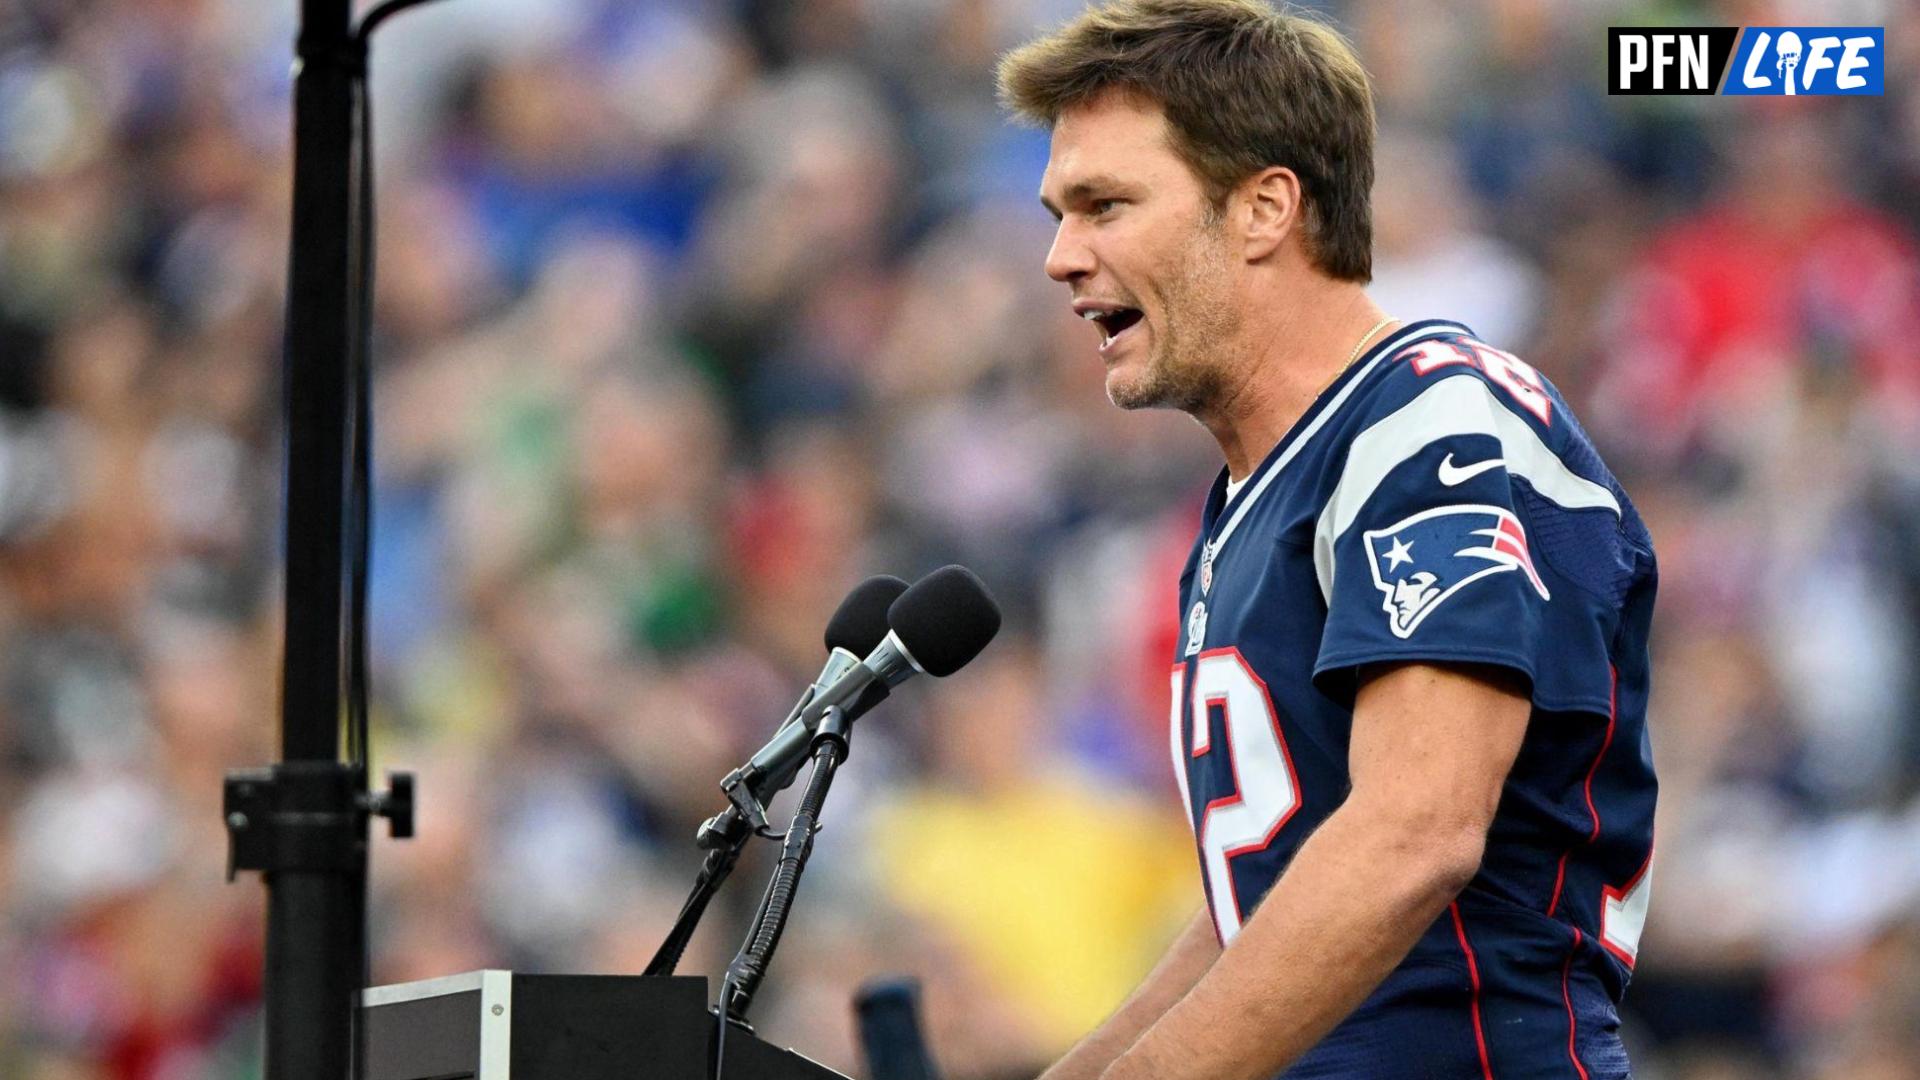 NFL World reacts to Tom Brady comparing NFL to flag football